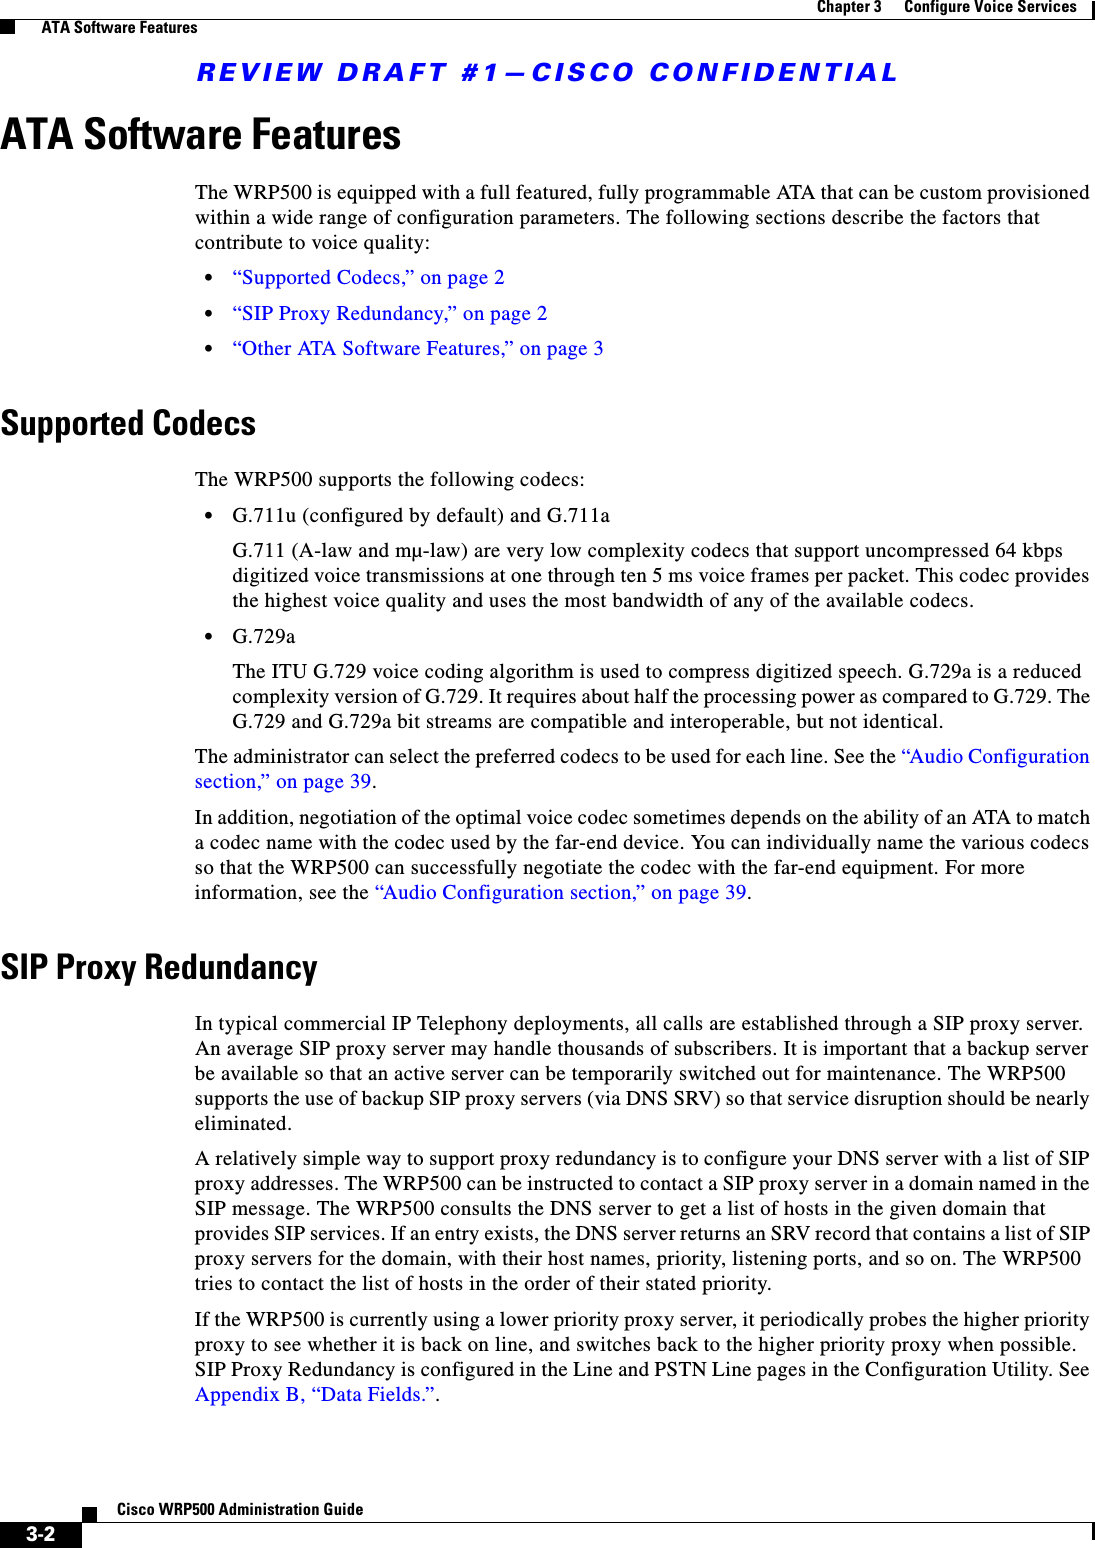 REVIEW DRAFT #1—CISCO CONFIDENTIAL3-2Cisco WRP500 Administration Guide Chapter 3      Configure Voice Services  ATA Software FeaturesATA Software FeaturesThe WRP500 is equipped with a full featured, fully programmable ATA that can be custom provisioned within a wide range of configuration parameters. The following sections describe the factors that contribute to voice quality:•“Supported Codecs,” on page 2•“SIP Proxy Redundancy,” on page 2•“Other ATA Software Features,” on page 3Supported CodecsThe WRP500 supports the following codecs:•G.711u (configured by default) and G.711a G.711 (A-law and mµ-law) are very low complexity codecs that support uncompressed 64 kbps digitized voice transmissions at one through ten 5 ms voice frames per packet. This codec provides the highest voice quality and uses the most bandwidth of any of the available codecs.•G.729aThe ITU G.729 voice coding algorithm is used to compress digitized speech. G.729a is a reduced complexity version of G.729. It requires about half the processing power as compared to G.729. The G.729 and G.729a bit streams are compatible and interoperable, but not identical.The administrator can select the preferred codecs to be used for each line. See the “Audio Configuration section,” on page 39. In addition, negotiation of the optimal voice codec sometimes depends on the ability of an ATA to match a codec name with the codec used by the far-end device. You can individually name the various codecs so that the WRP500 can successfully negotiate the codec with the far-end equipment. For more information, see the “Audio Configuration section,” on page 39.SIP Proxy RedundancyIn typical commercial IP Telephony deployments, all calls are established through a SIP proxy server. An average SIP proxy server may handle thousands of subscribers. It is important that a backup server be available so that an active server can be temporarily switched out for maintenance. The WRP500 supports the use of backup SIP proxy servers (via DNS SRV) so that service disruption should be nearly eliminated.A relatively simple way to support proxy redundancy is to configure your DNS server with a list of SIP proxy addresses. The WRP500 can be instructed to contact a SIP proxy server in a domain named in the SIP message. The WRP500 consults the DNS server to get a list of hosts in the given domain that provides SIP services. If an entry exists, the DNS server returns an SRV record that contains a list of SIP proxy servers for the domain, with their host names, priority, listening ports, and so on. The WRP500 tries to contact the list of hosts in the order of their stated priority.If the WRP500 is currently using a lower priority proxy server, it periodically probes the higher priority proxy to see whether it is back on line, and switches back to the higher priority proxy when possible. SIP Proxy Redundancy is configured in the Line and PSTN Line pages in the Configuration Utility. See Appendix B, “Data Fields.”.